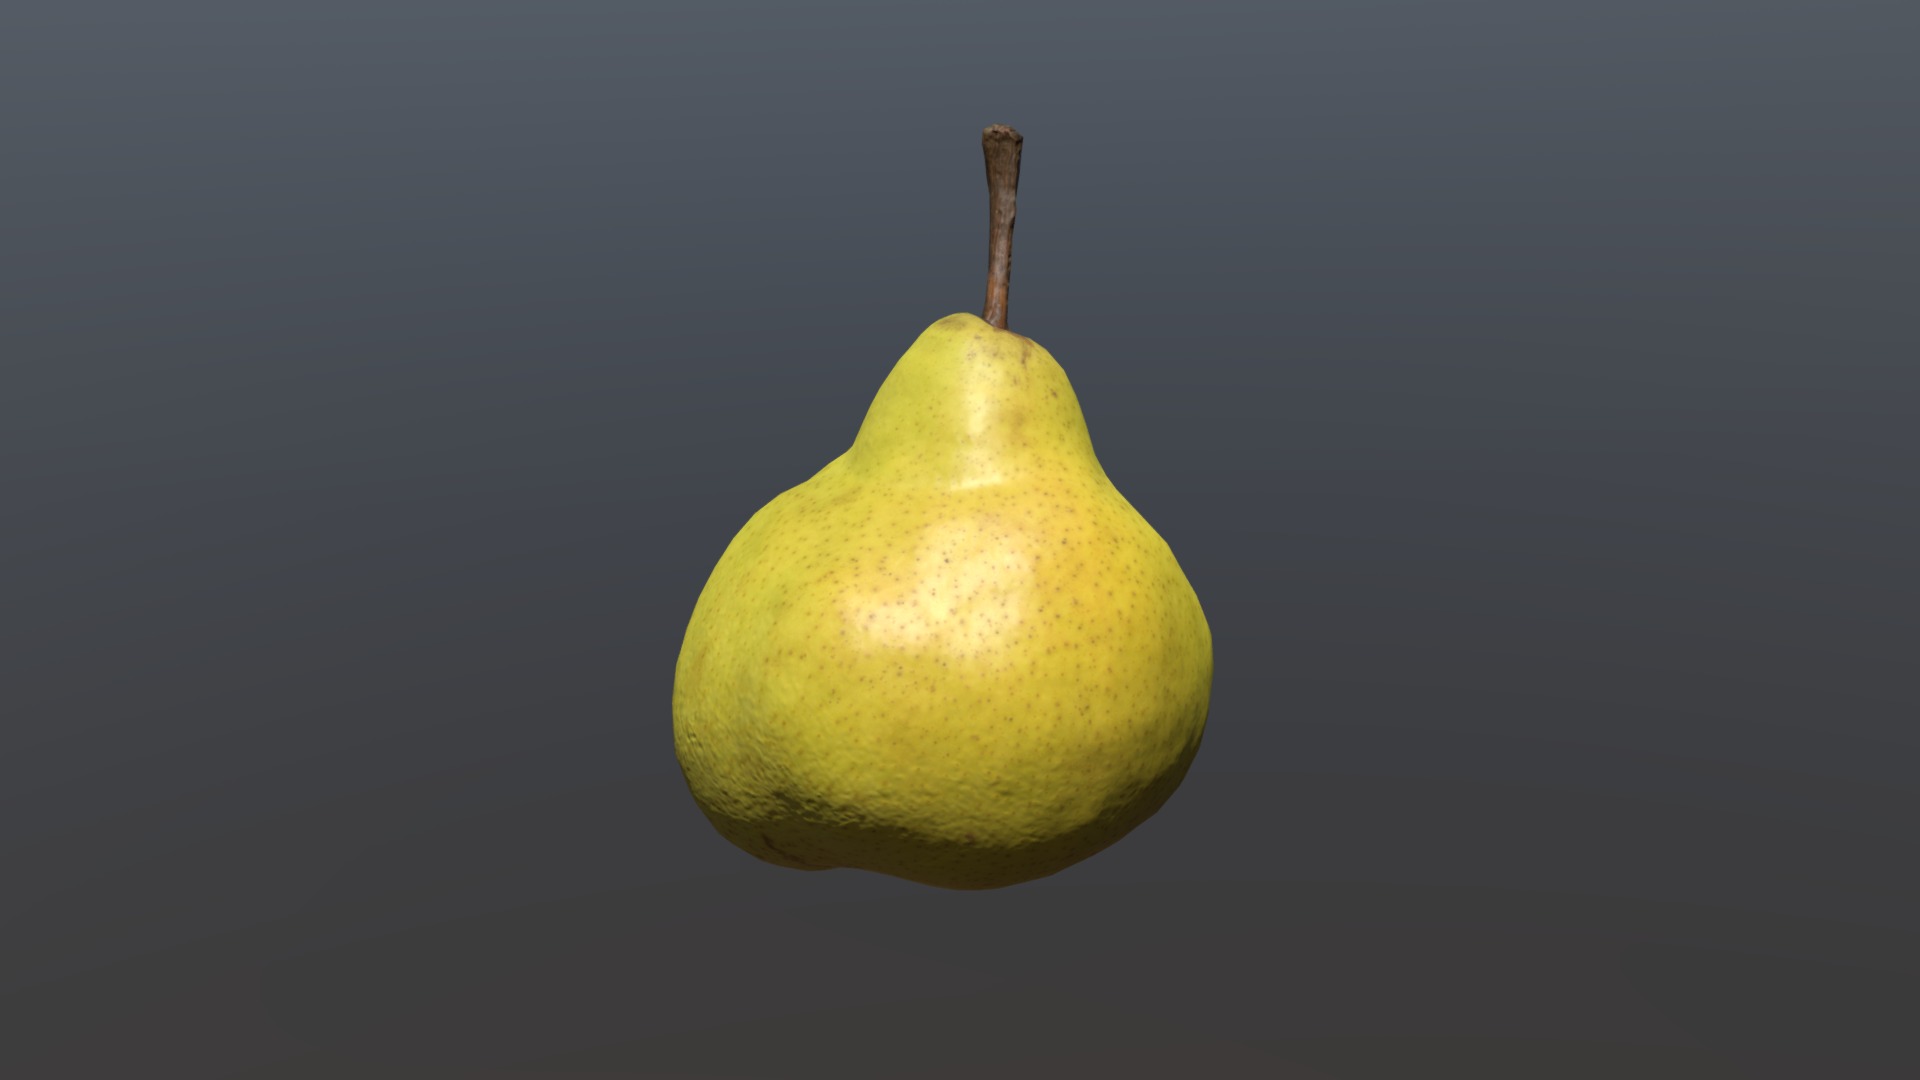 3D model Pear (Груша) - This is a 3D model of the Pear (Груша). The 3D model is about a yellow pear on a black background.